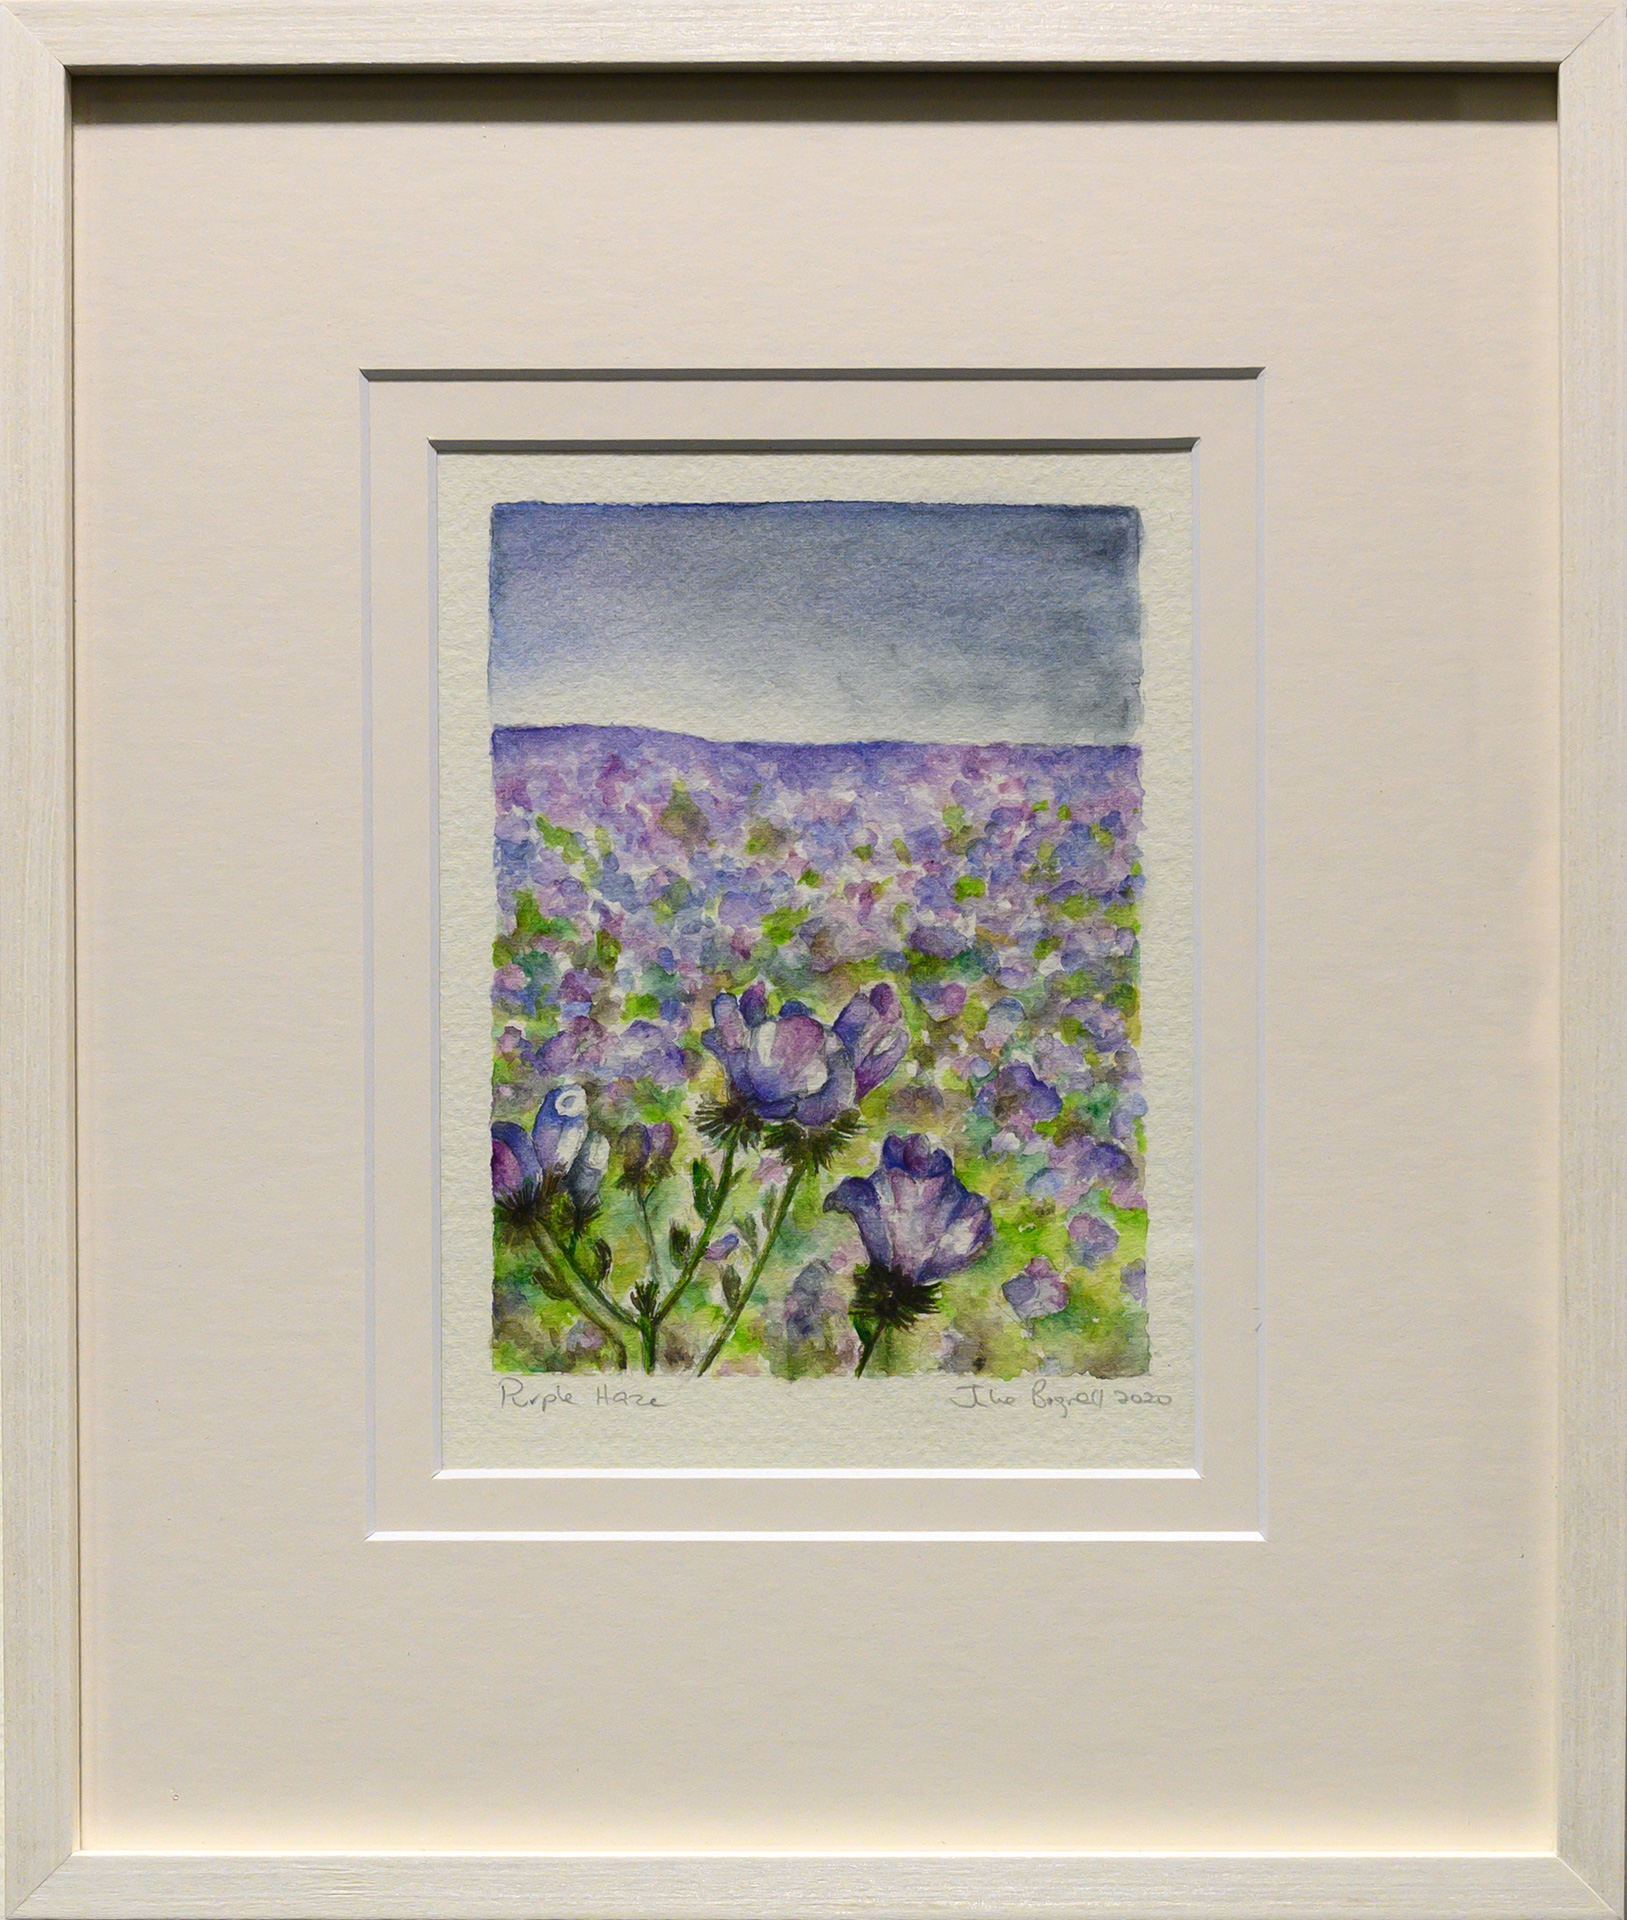 Framed artwork by Julie Bignell of purple flowers in the foreground with a field of purple flowers in the background and blue sky